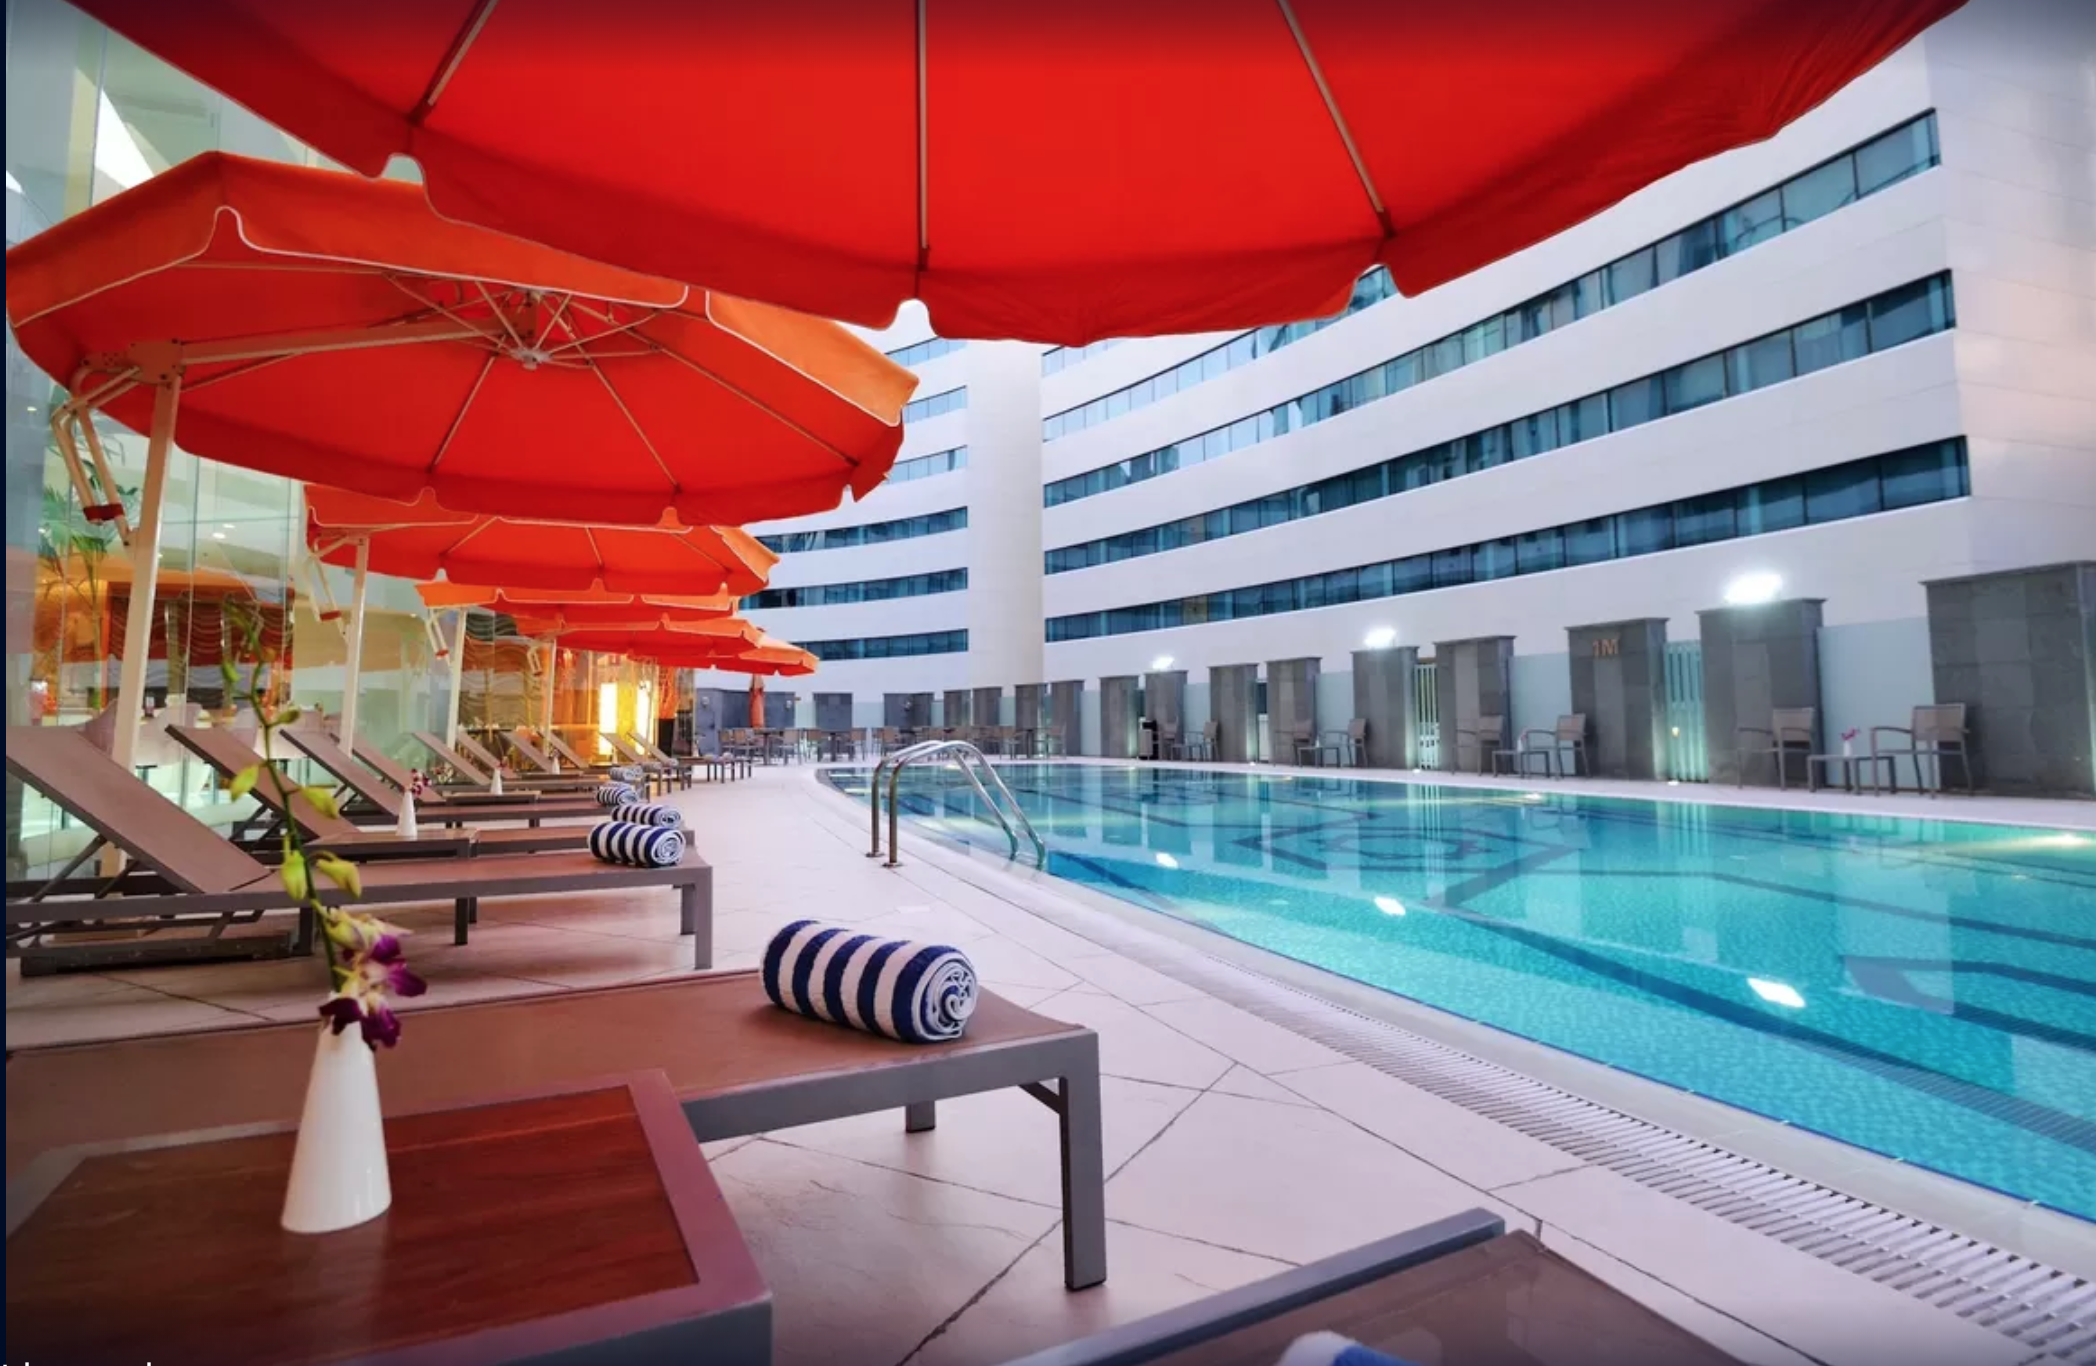 outdoor pool with lounge deck chairs at Holiday Villa Hotel & Residence City Centre Doha